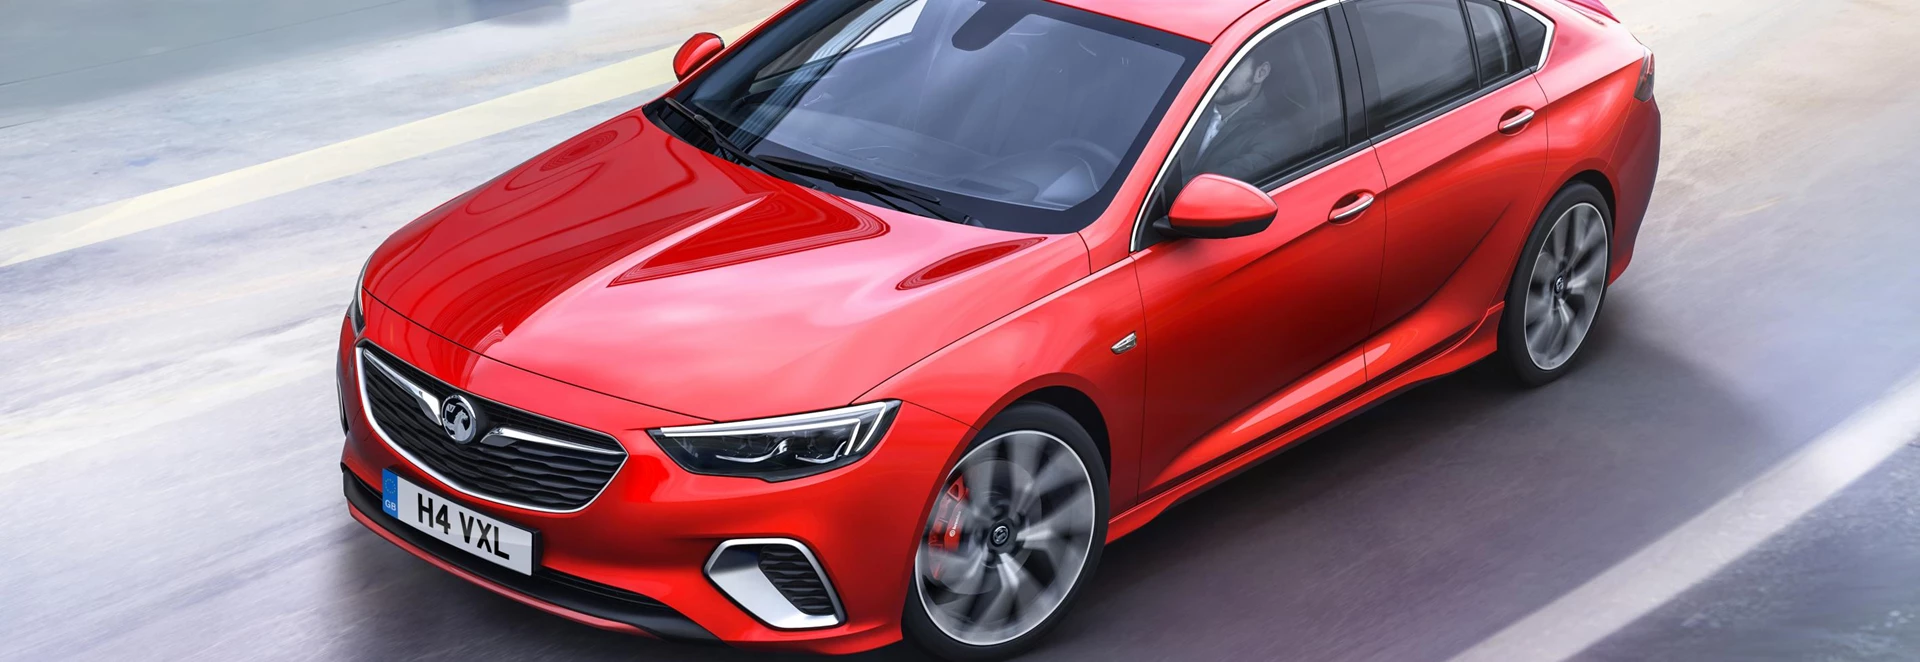 Vauxhall reveals Insignia GSi with 257bhp 